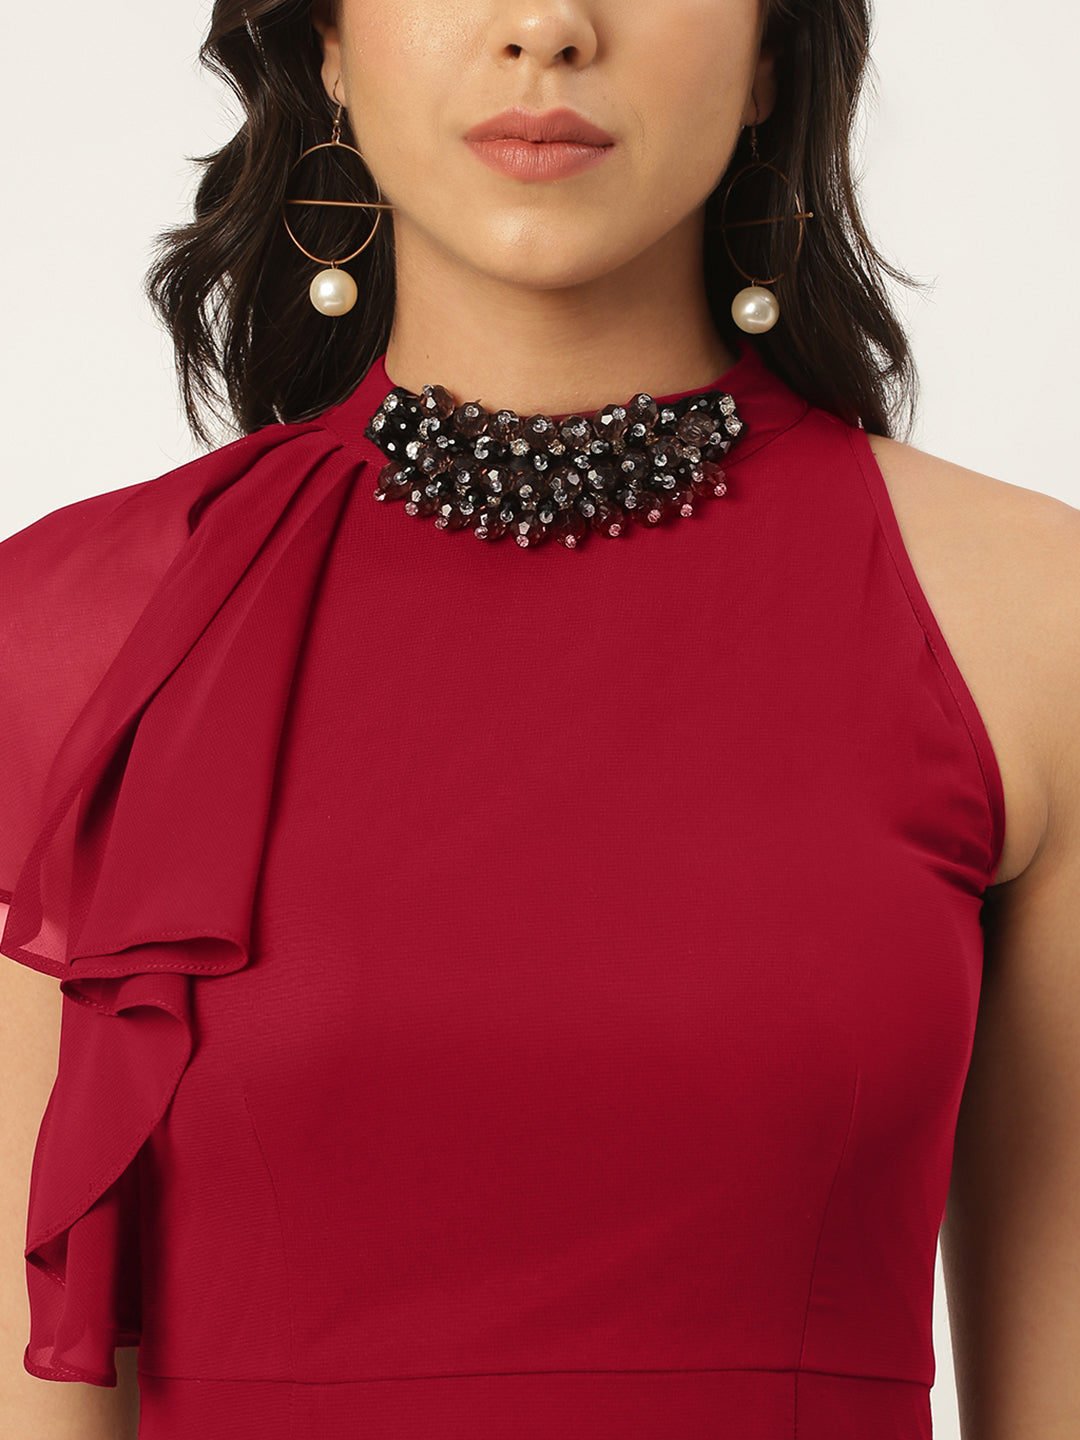 Maroon Solid Maxi Dress with Embellished Neck